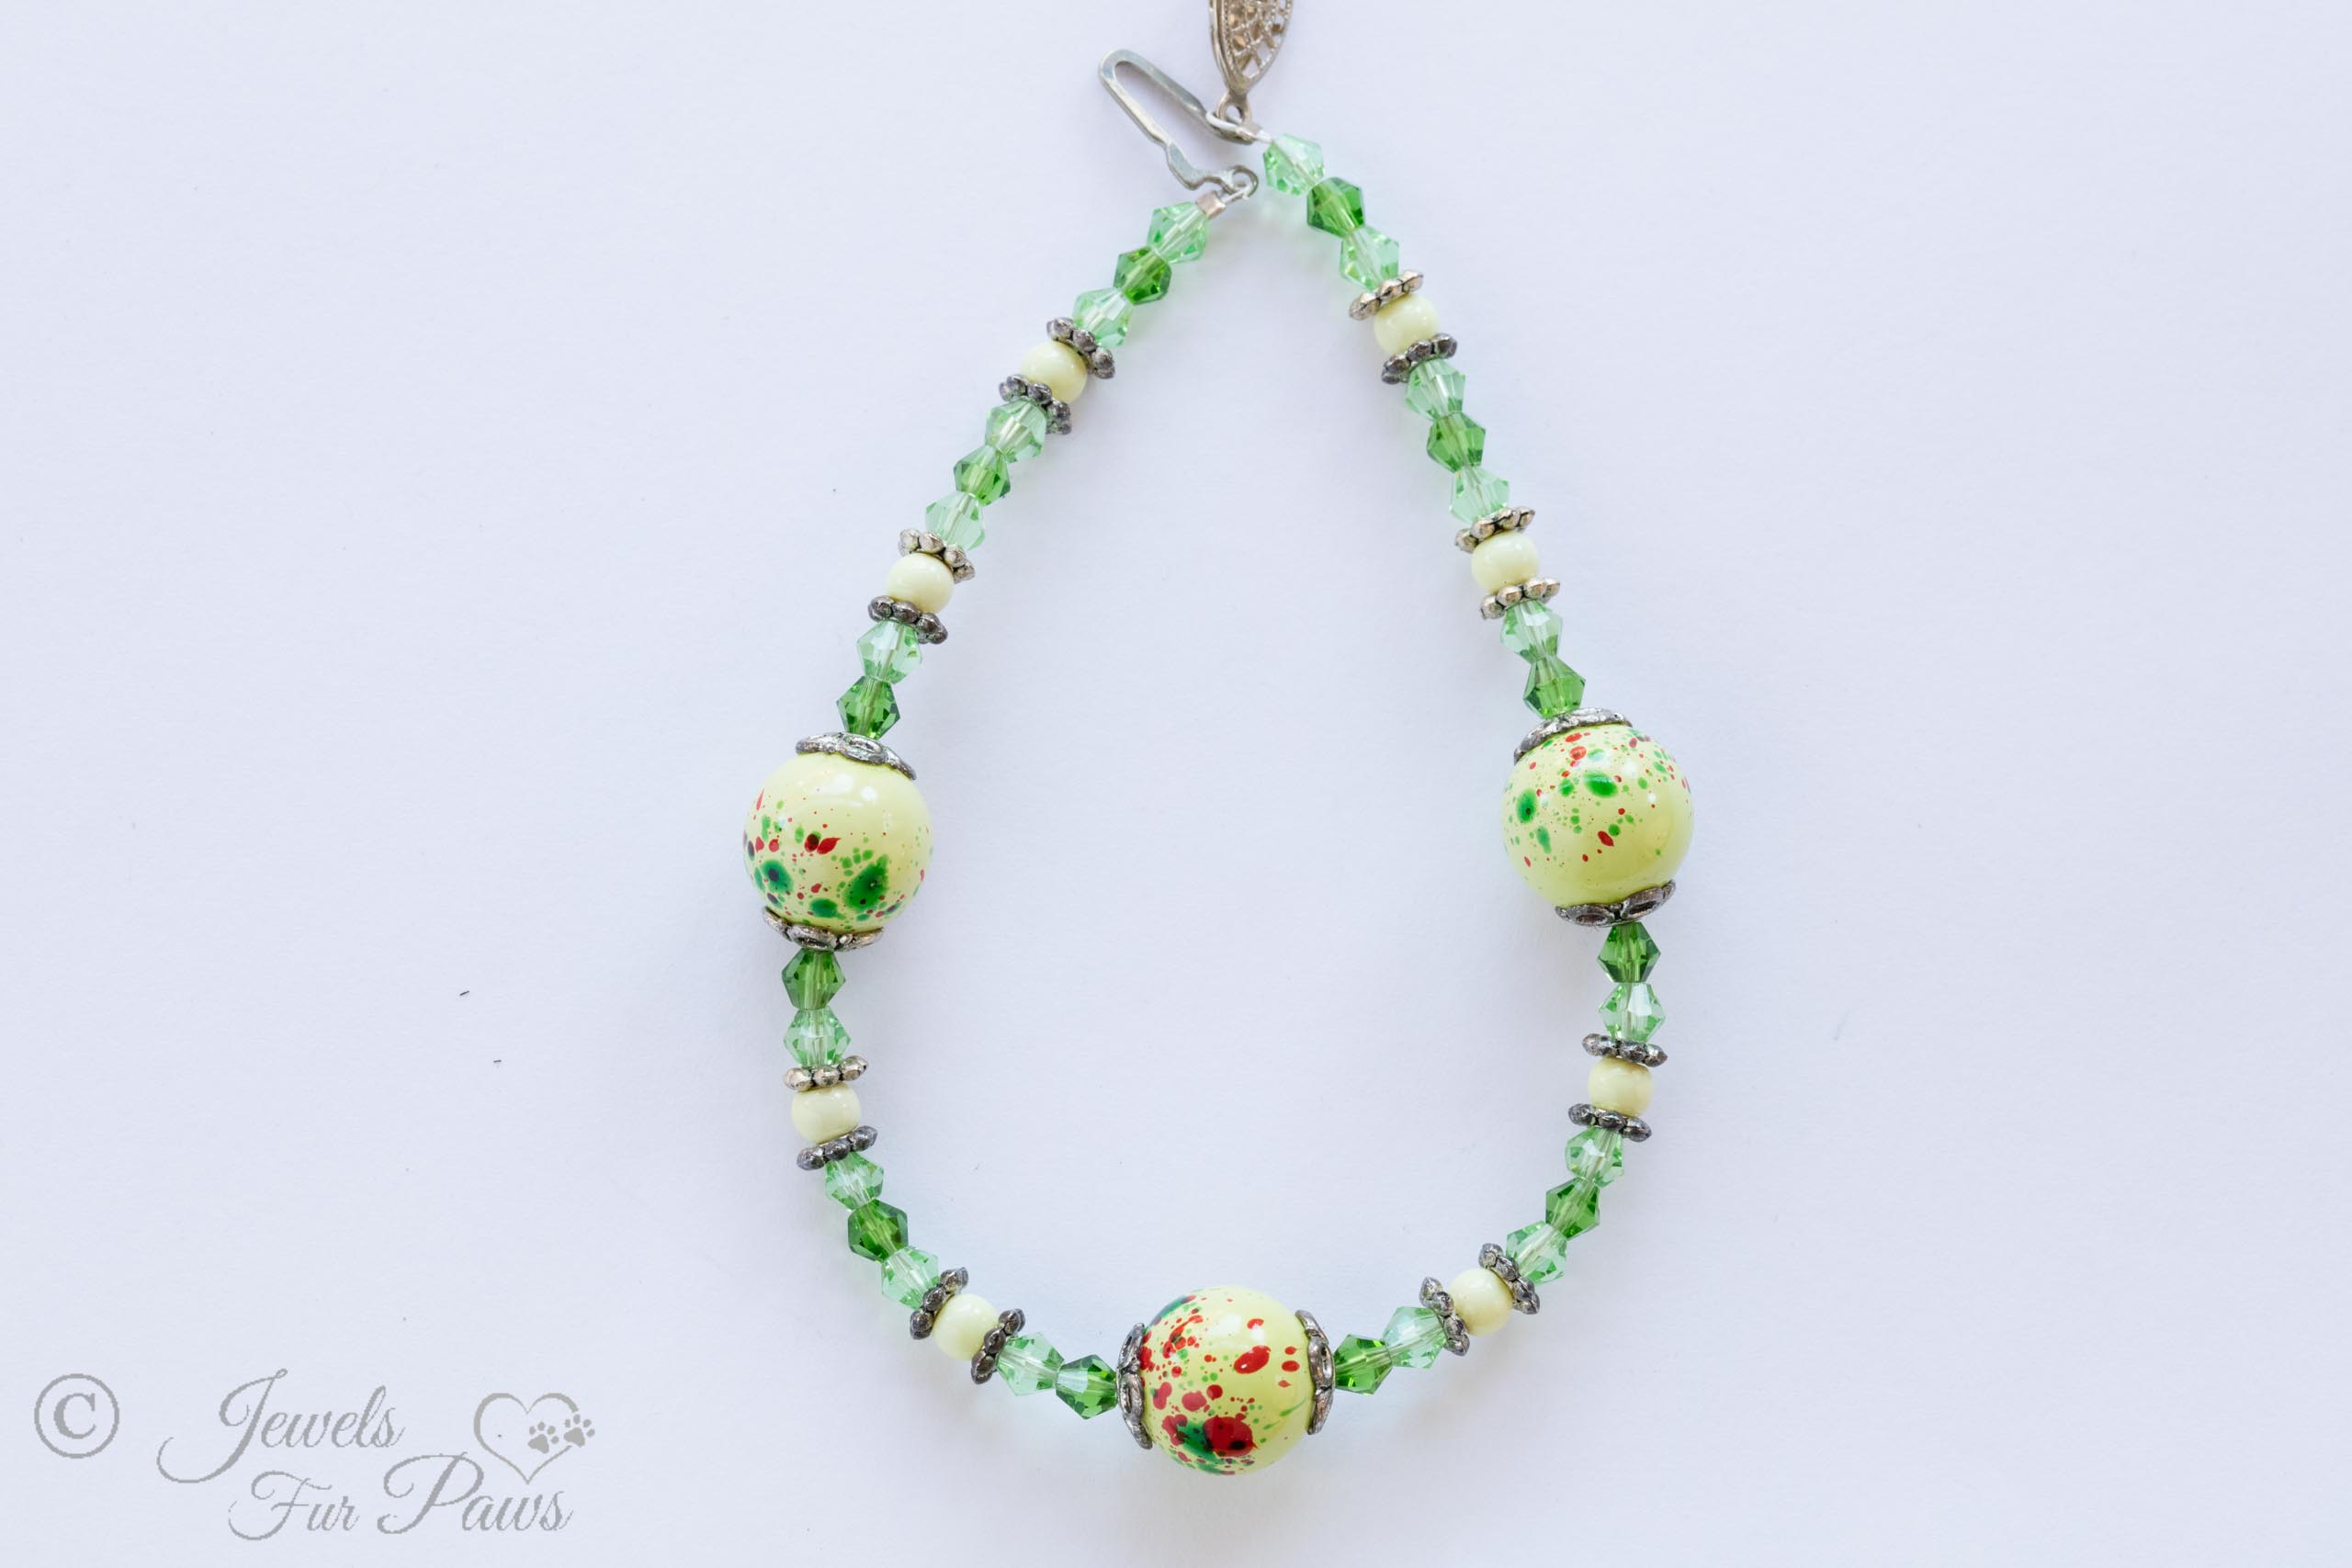 3 large speckled light green beads with faceted green crystals, white beads, and silver spacers for extra small dogs and cats